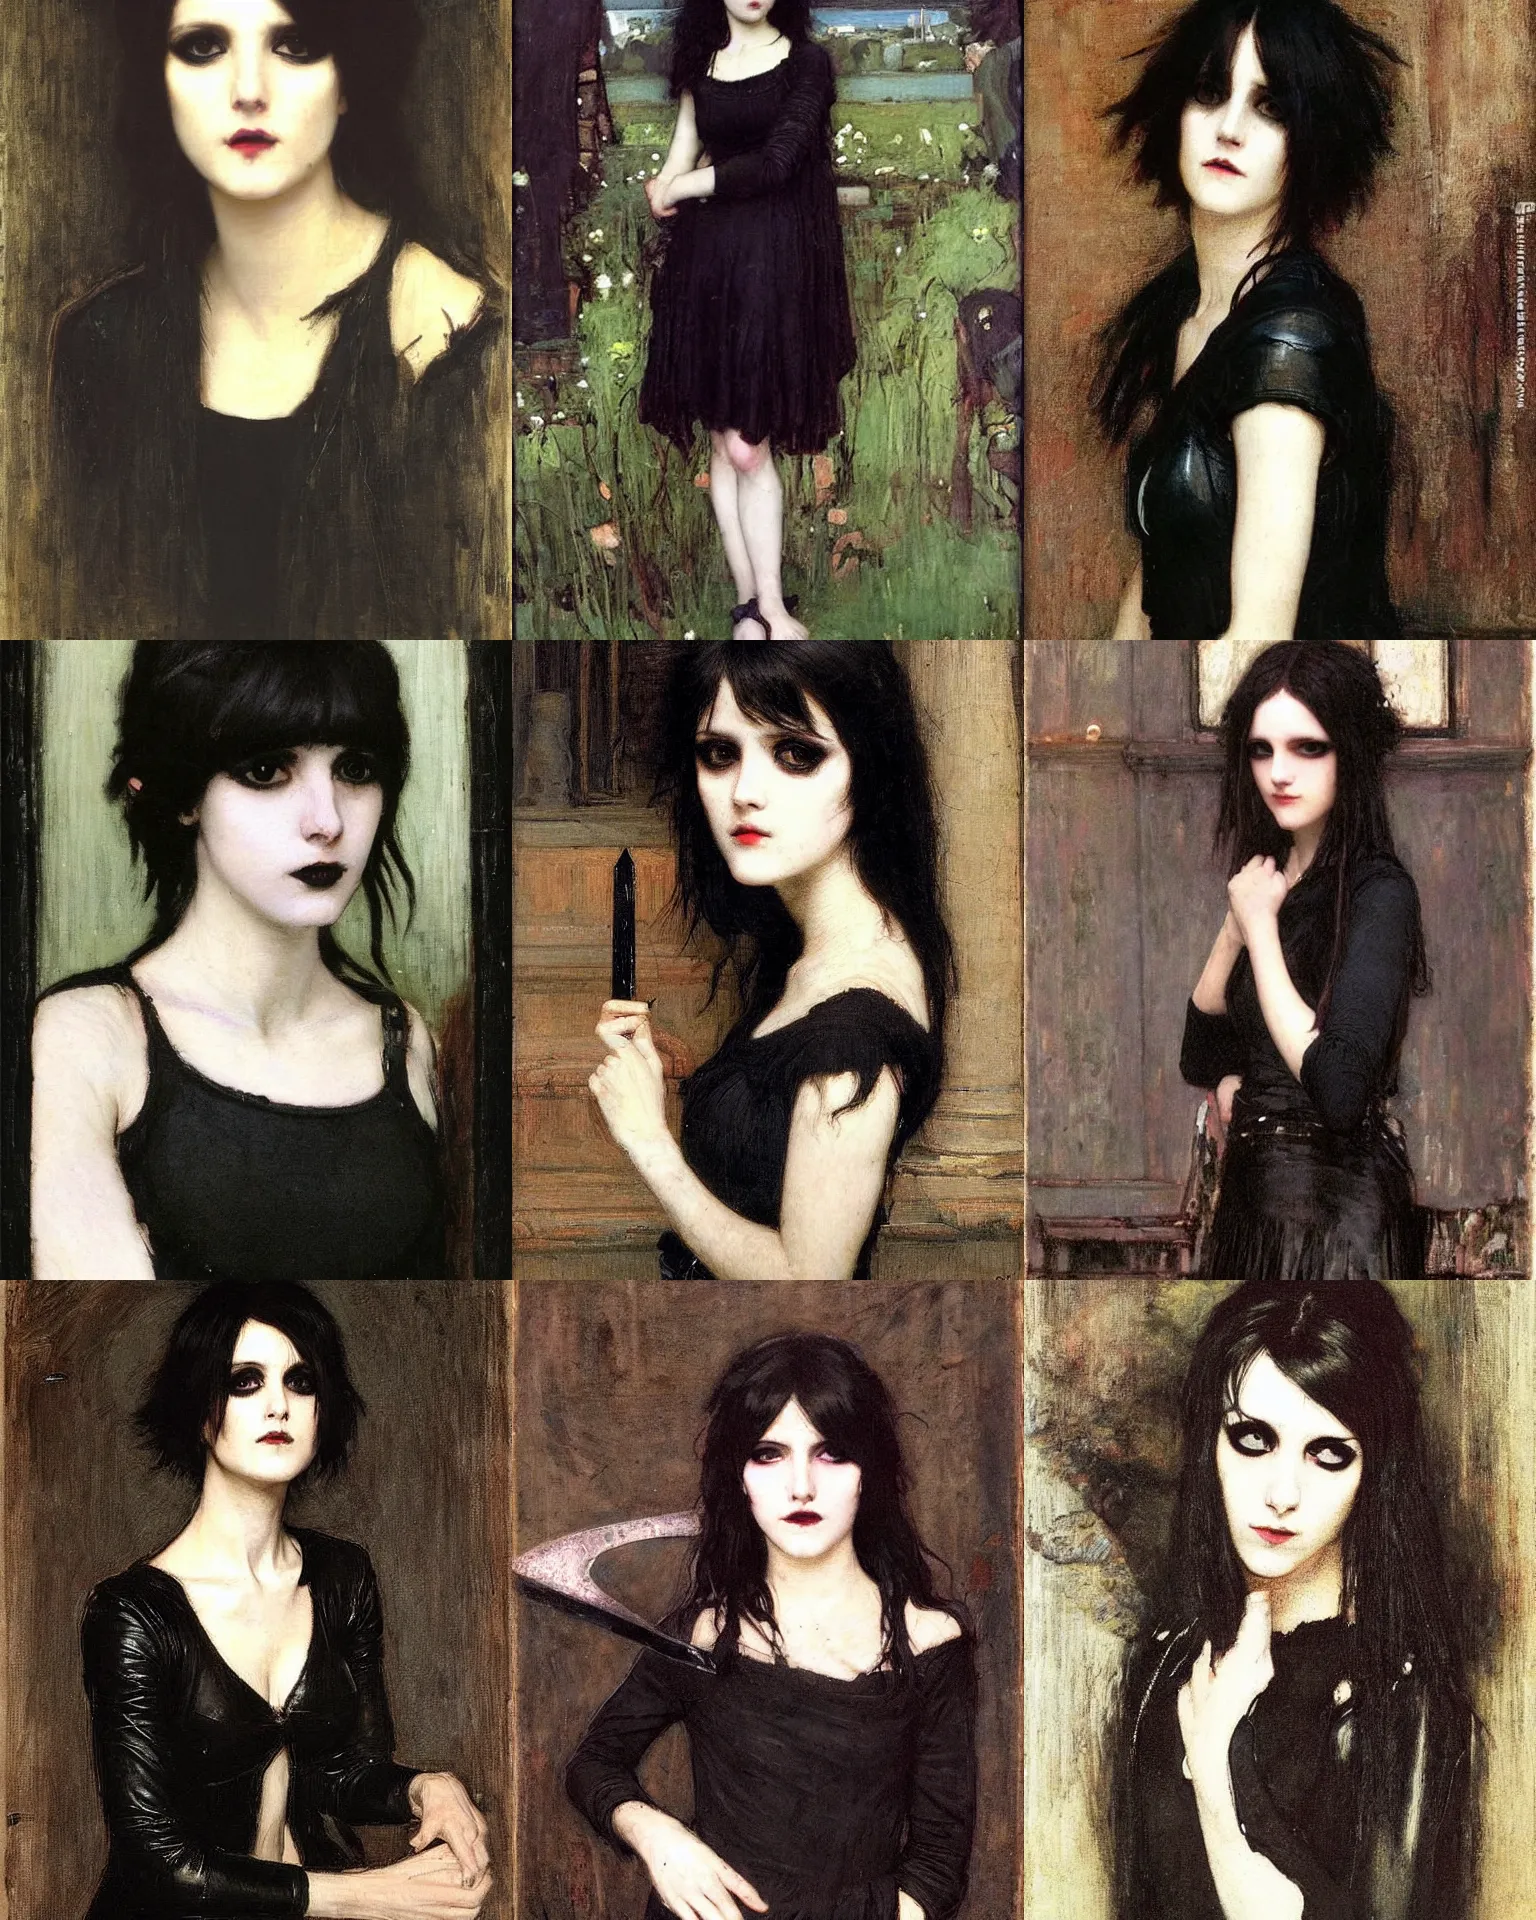 Prompt: A goth portrait by John William Waterhouse. She has large evil eyes with entirely-black sclerae!!!!!! Her hair is dark brown and cut into a short, messy pixie cut. She has a slightly rounded face, with a pointed chin, and a small nose. She is wearing a black leather jacket, a black knee-length skirt, a black choker, and black leather boots.